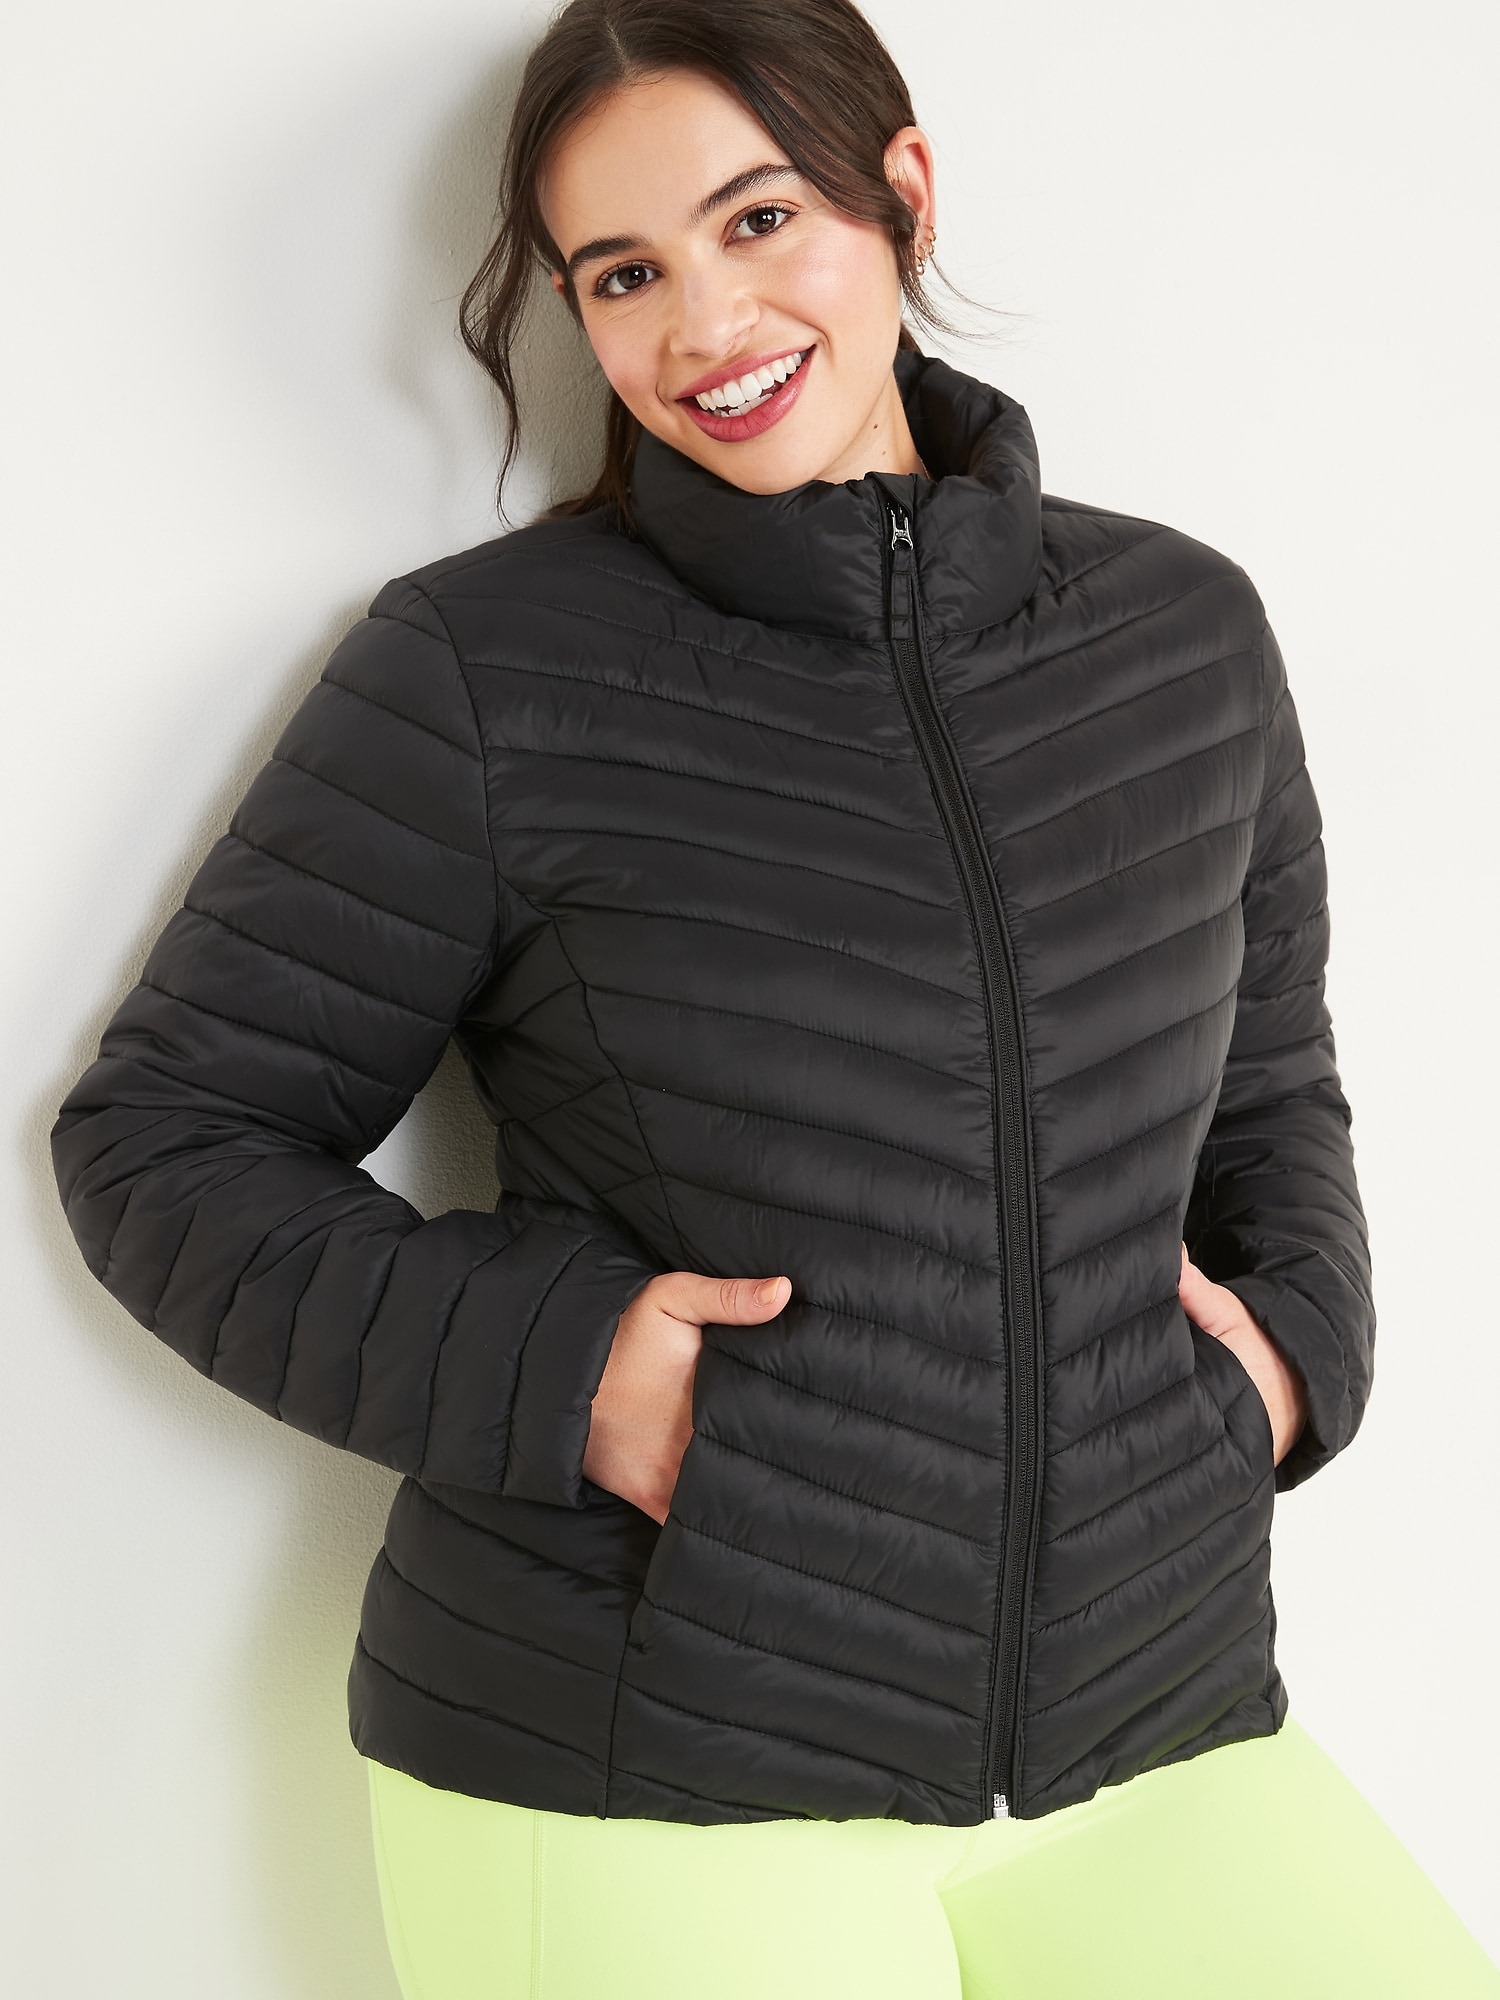 Narrow-Channel Jacket Puffer | Water-Resistant Women Packable Old Navy for